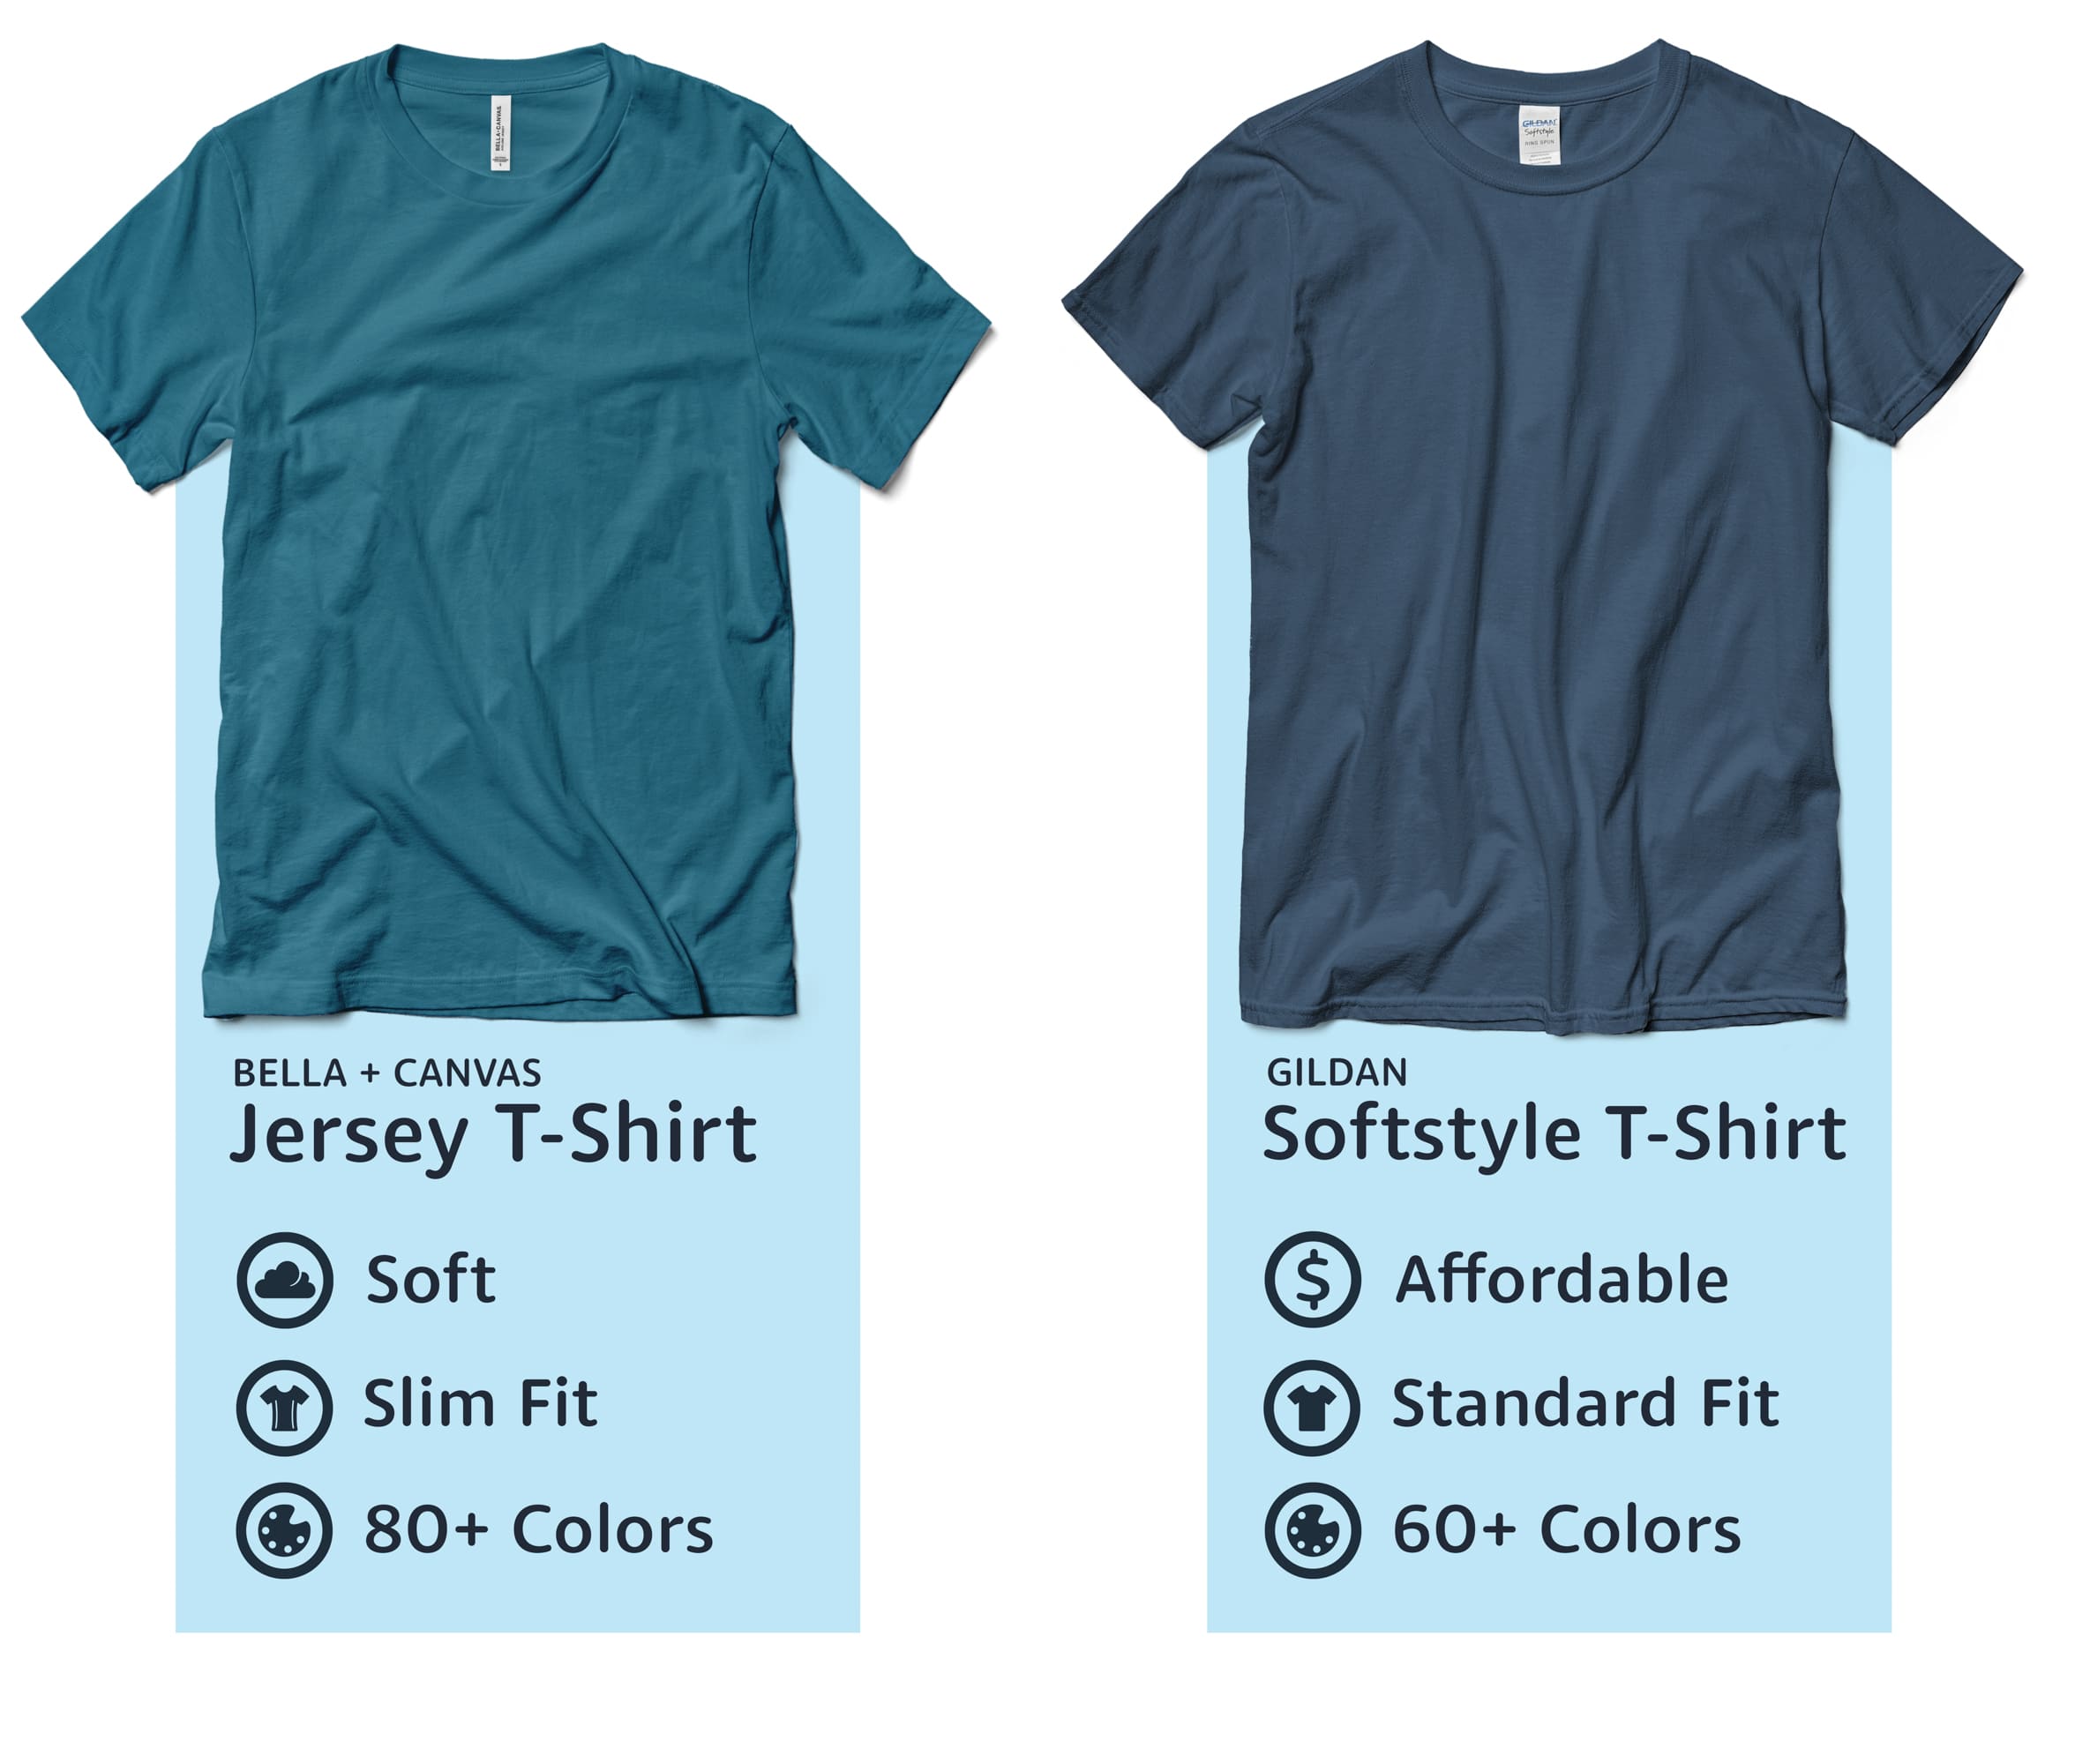 A comparison infographic of the Jersey T-Shirt and the Softstyle T-Shirt